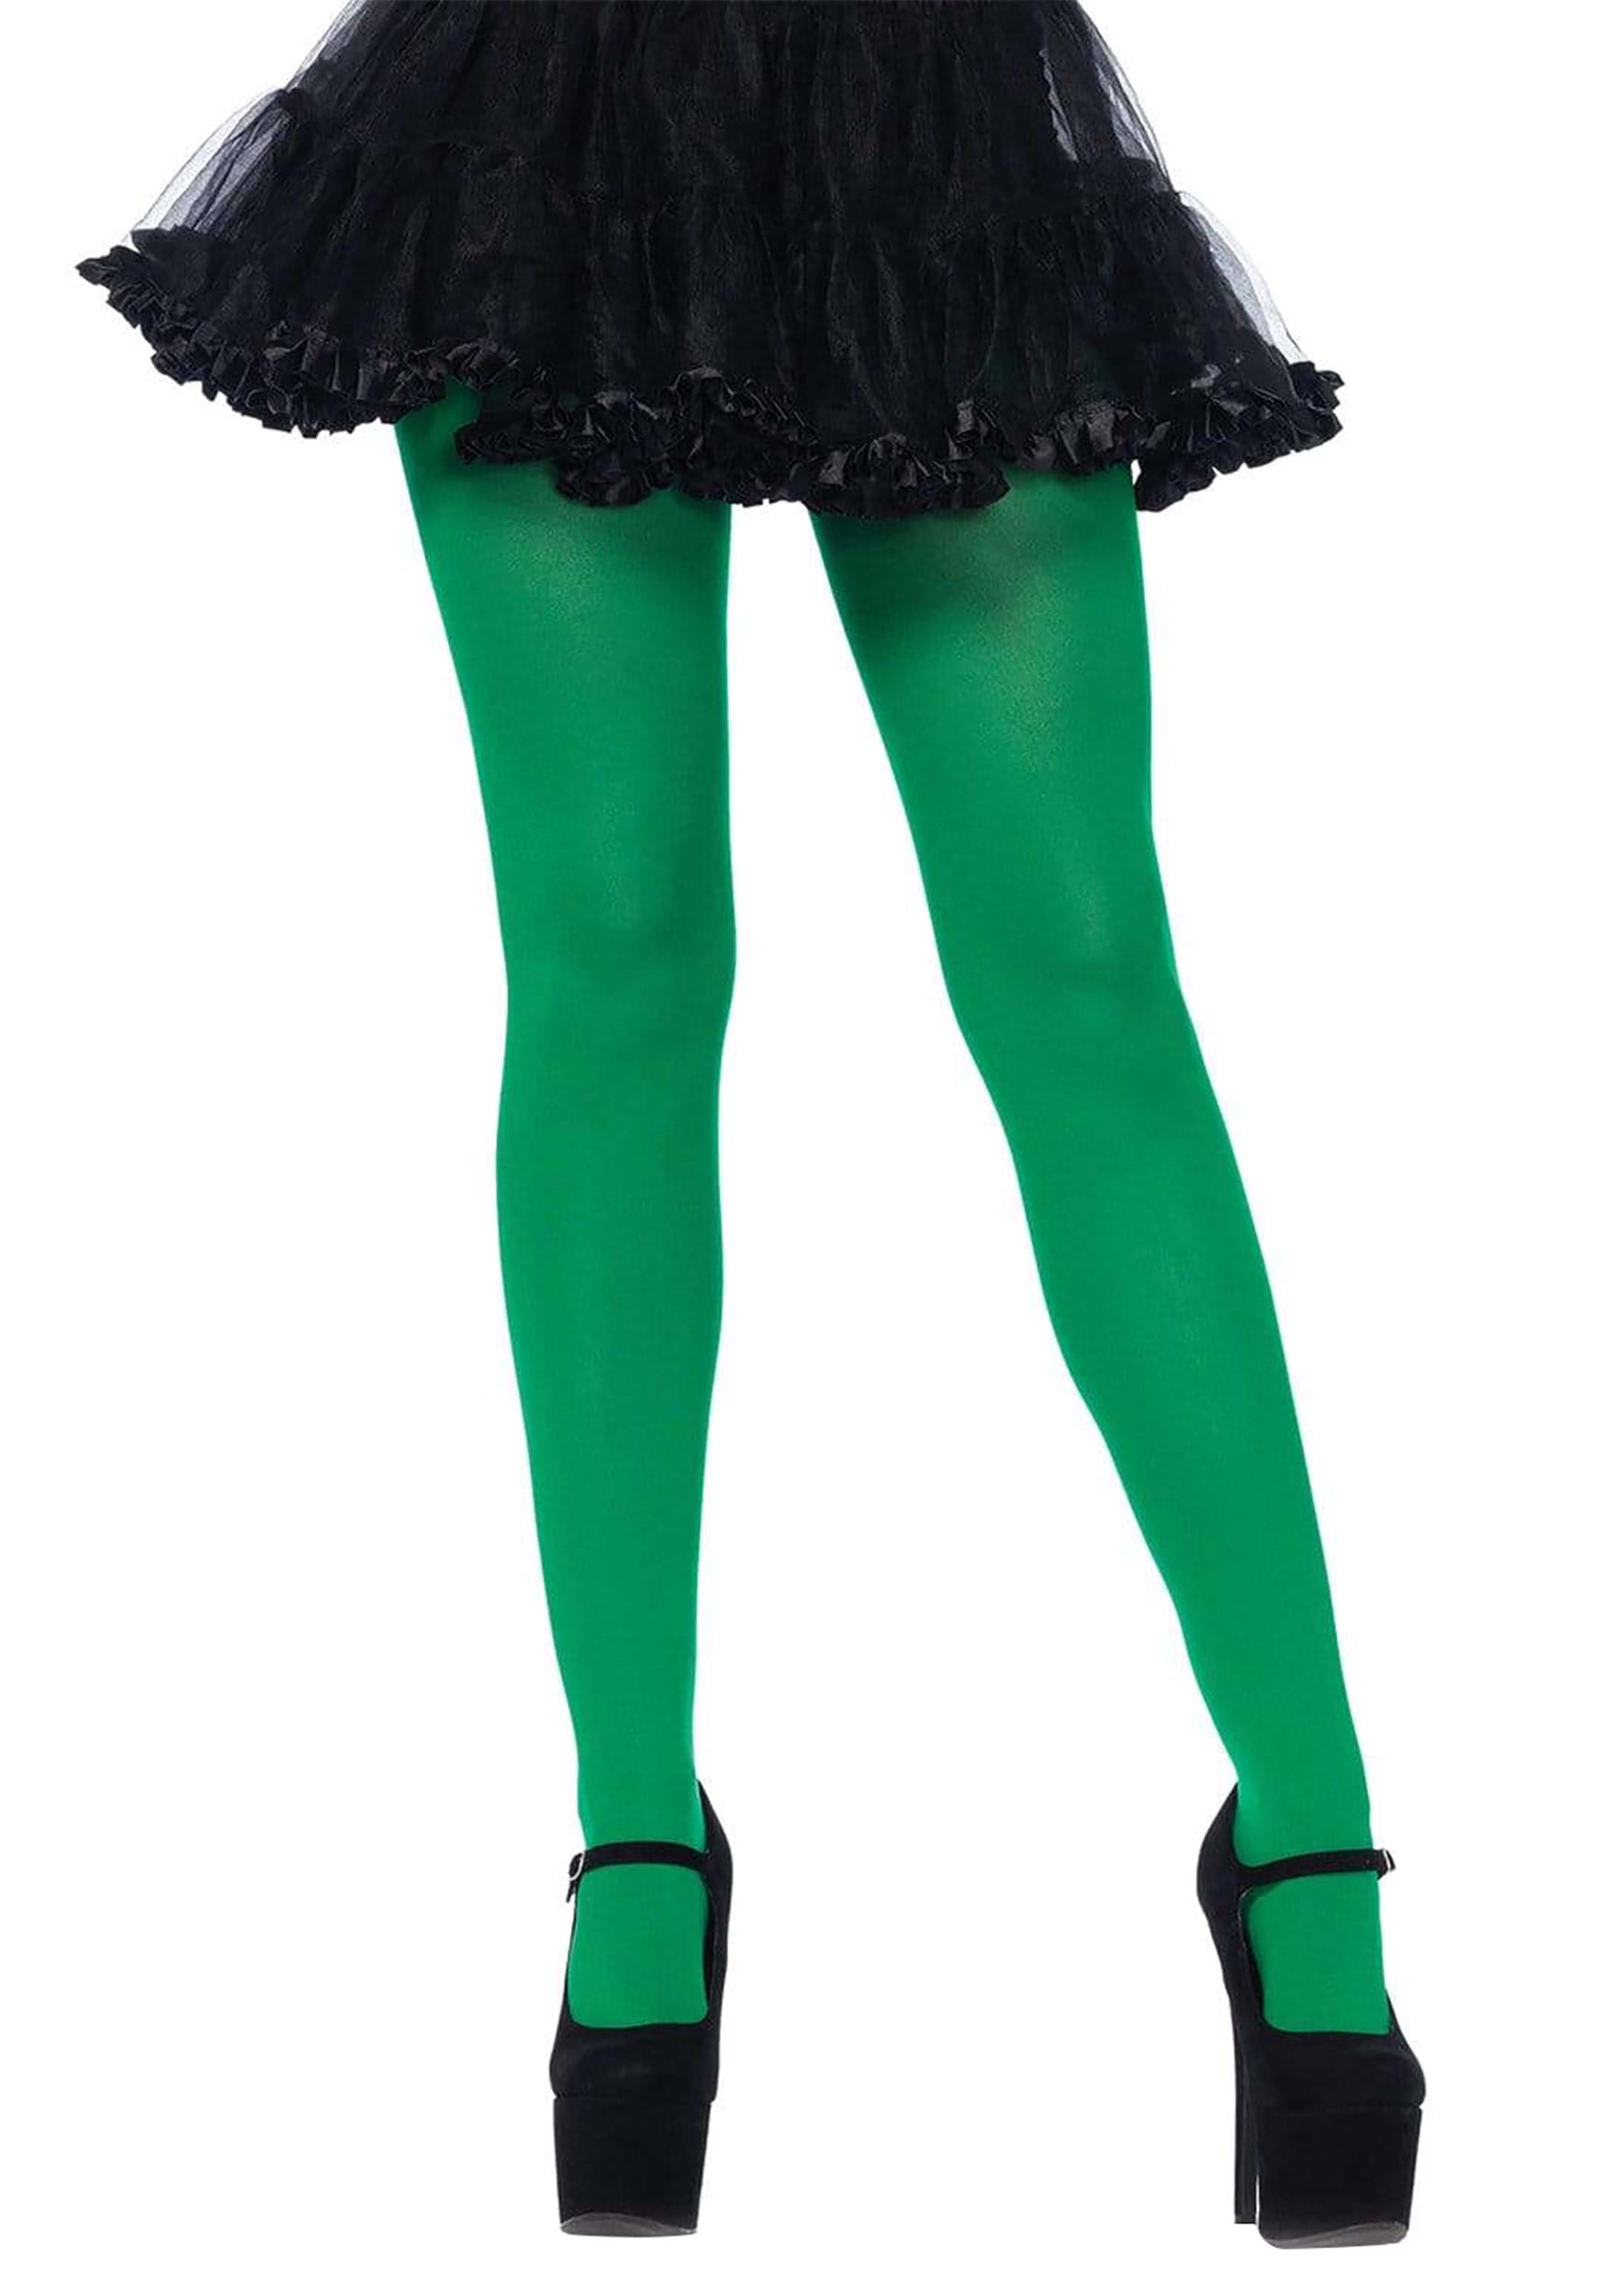 Green Plus Size Spandex Opaque Tights